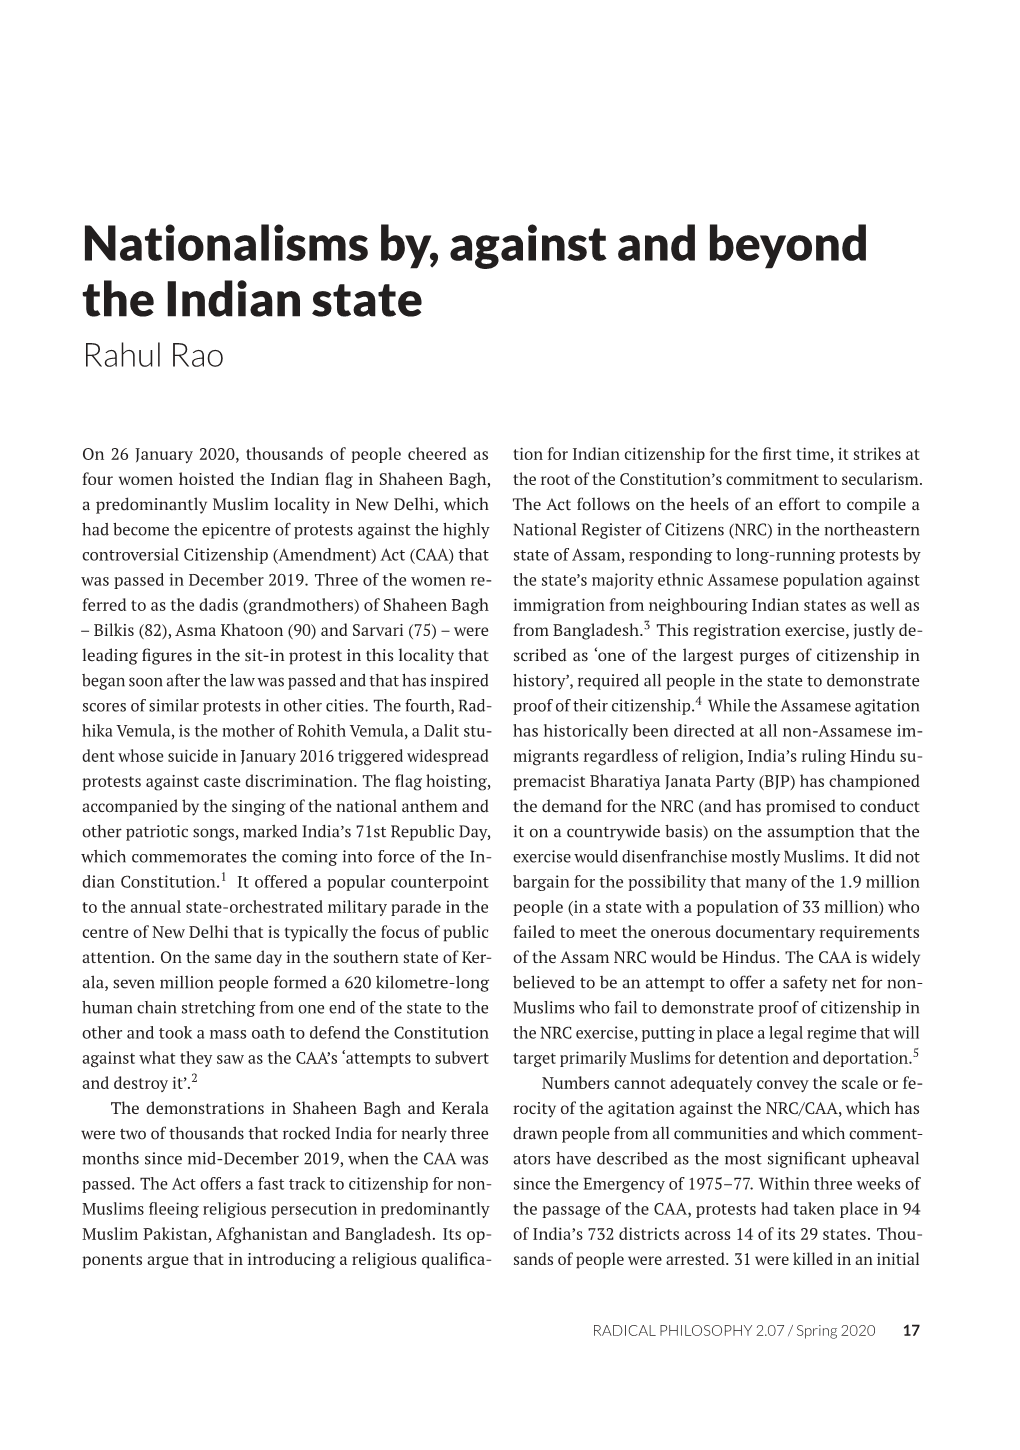 Nationalisms By, Against and Beyond the Indian State Rahul Rao